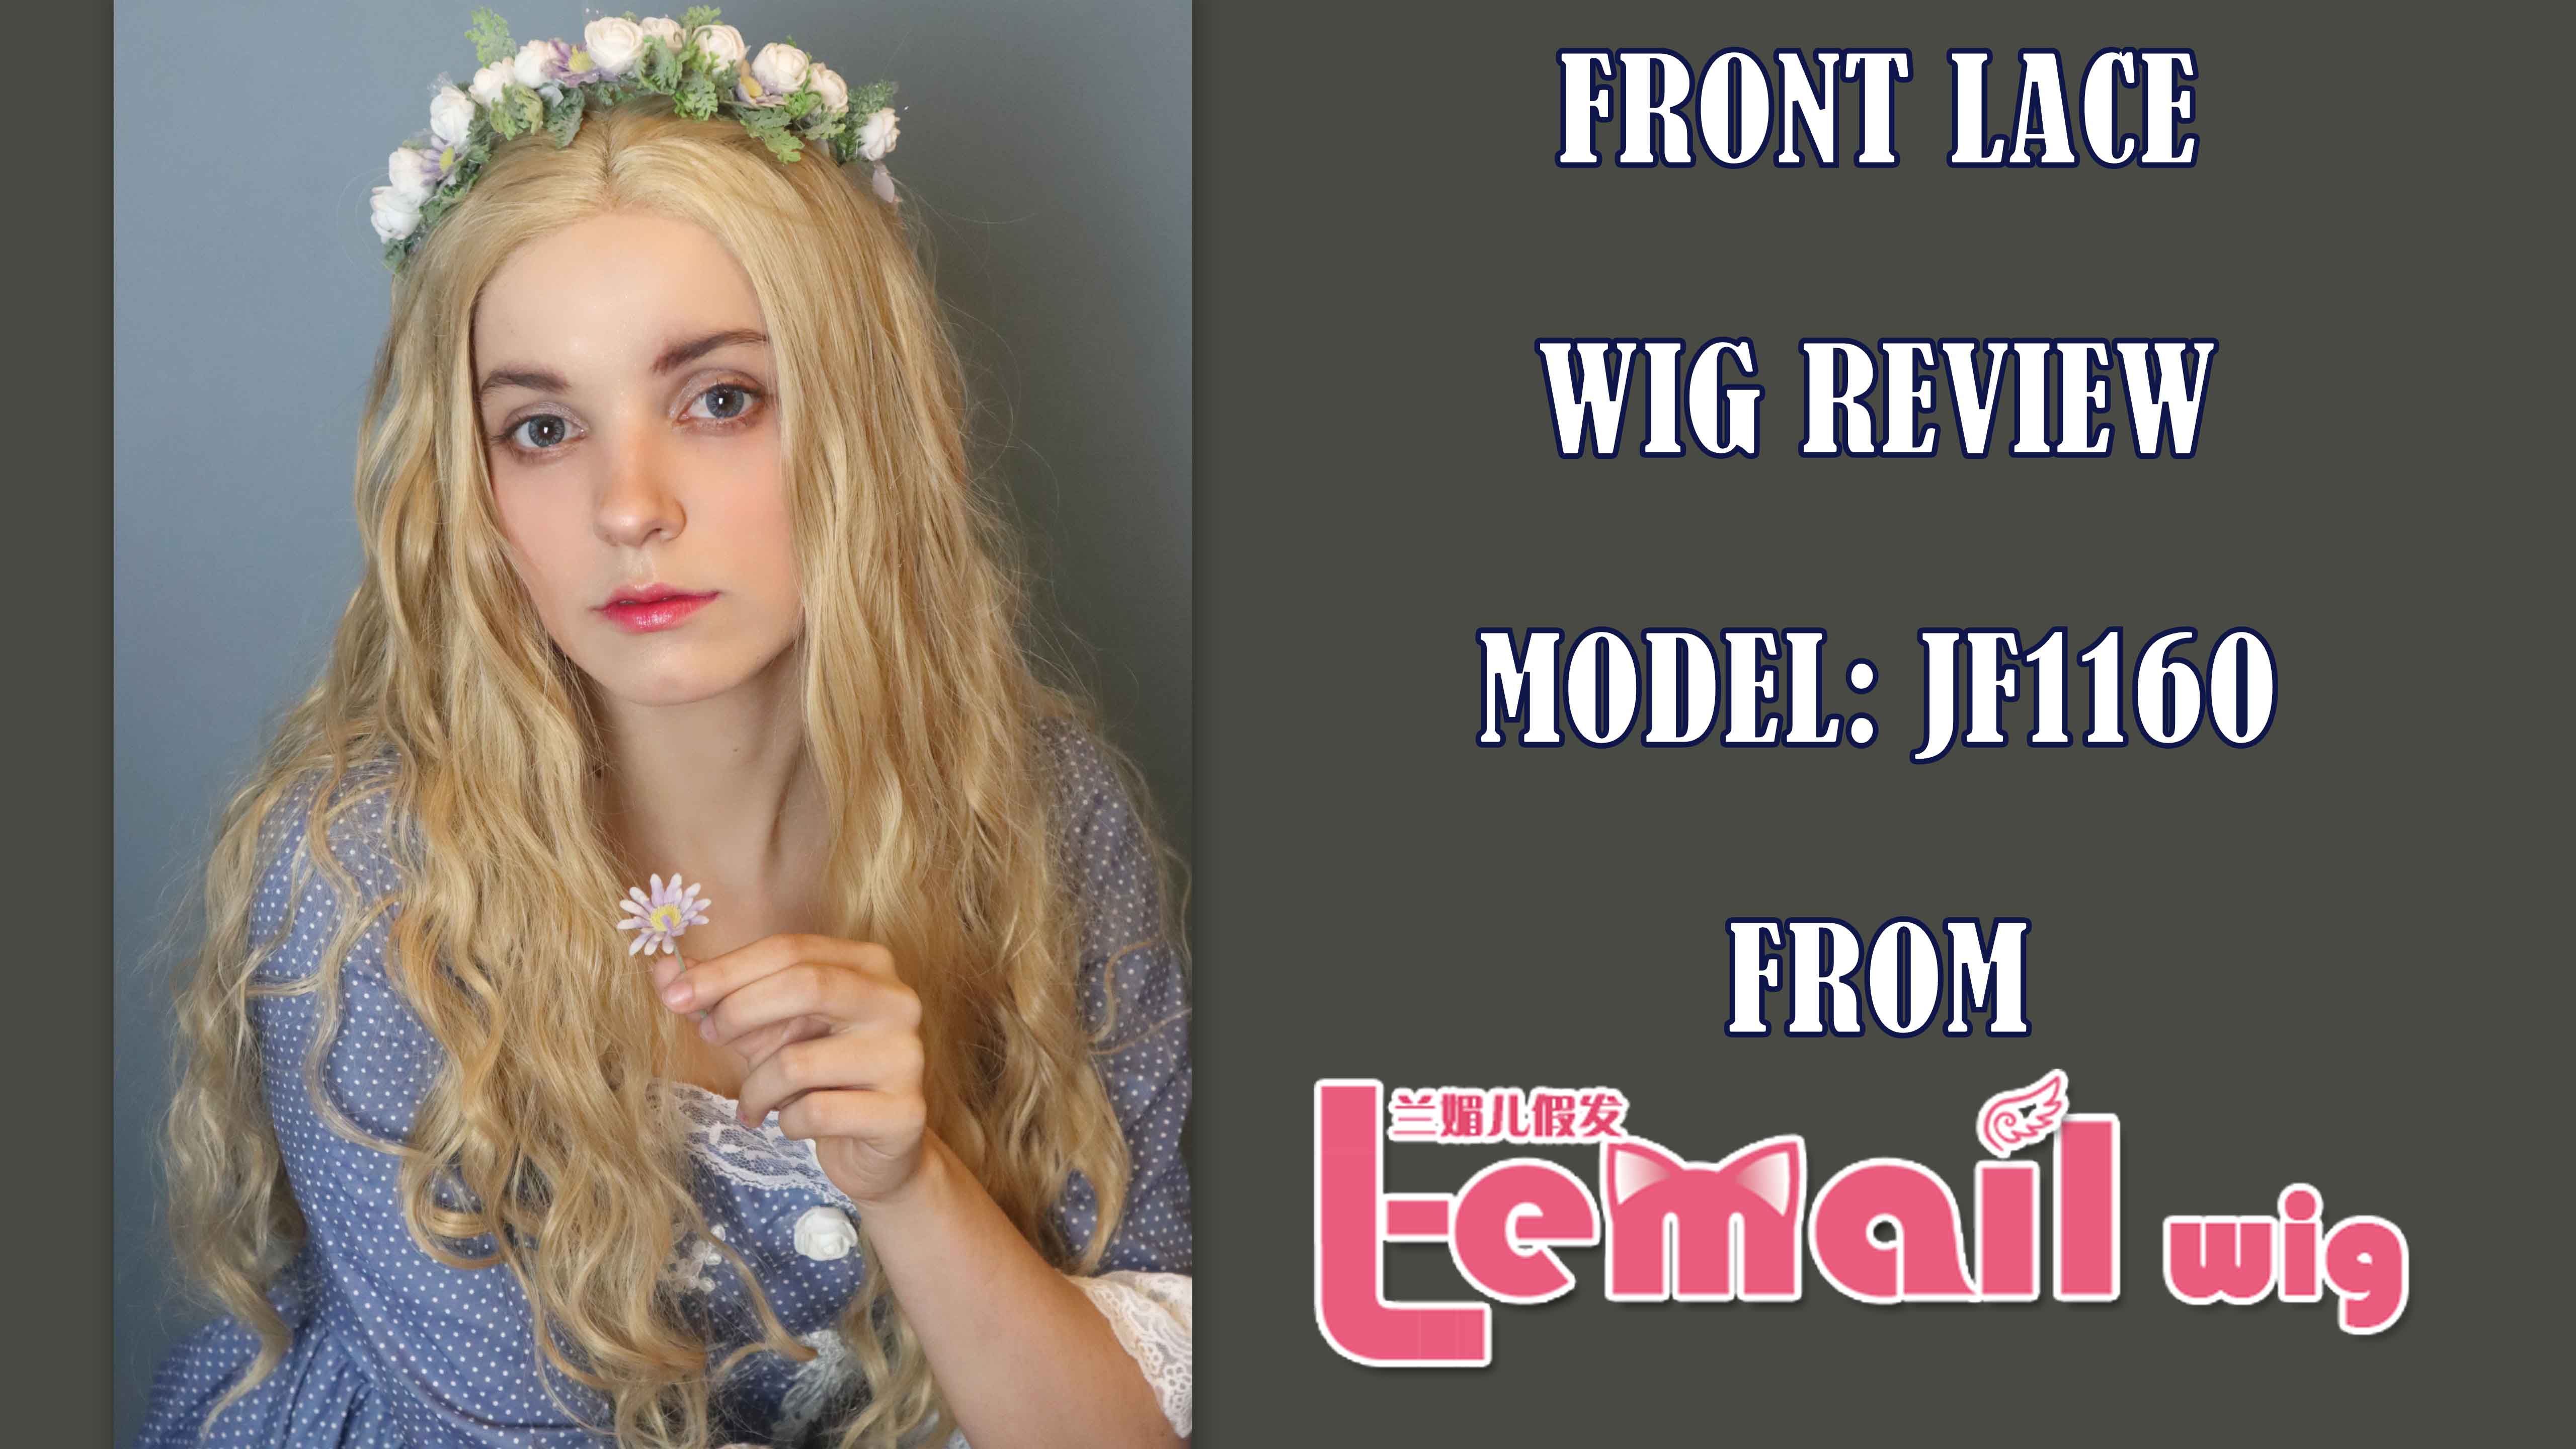 Frontlace Wig Review: model JF1160 from L-email wig // Wig-supplier